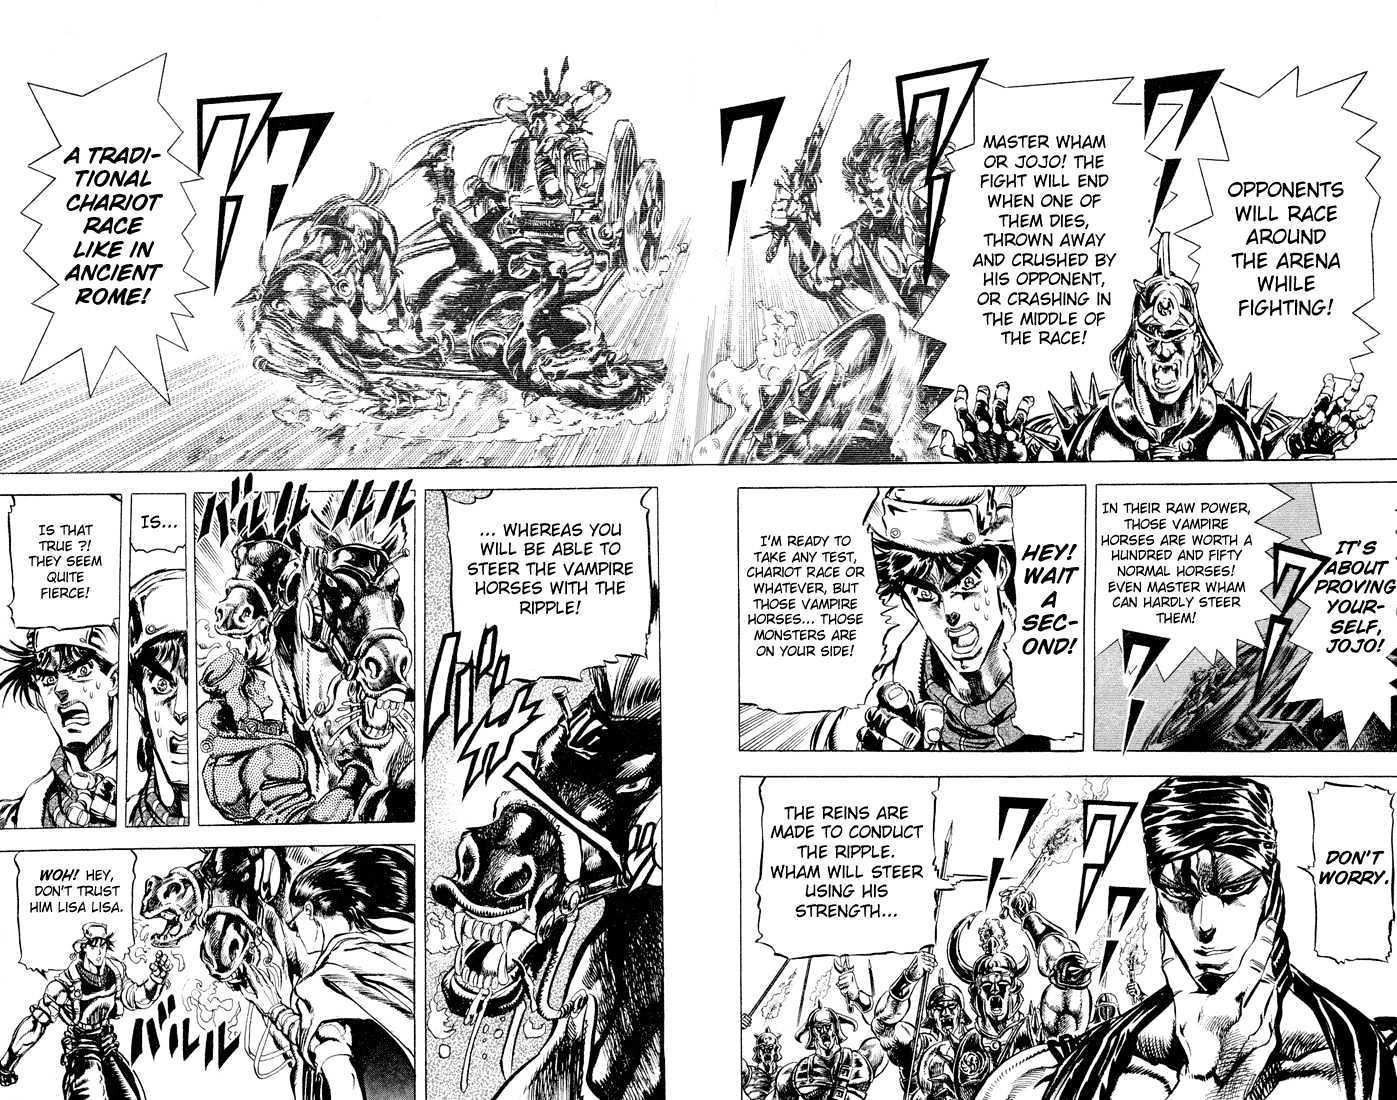 Jojo's Bizarre Adventure Vol.11 Chapter 97 : Furious Struggle From Ancient Times page 13 - 